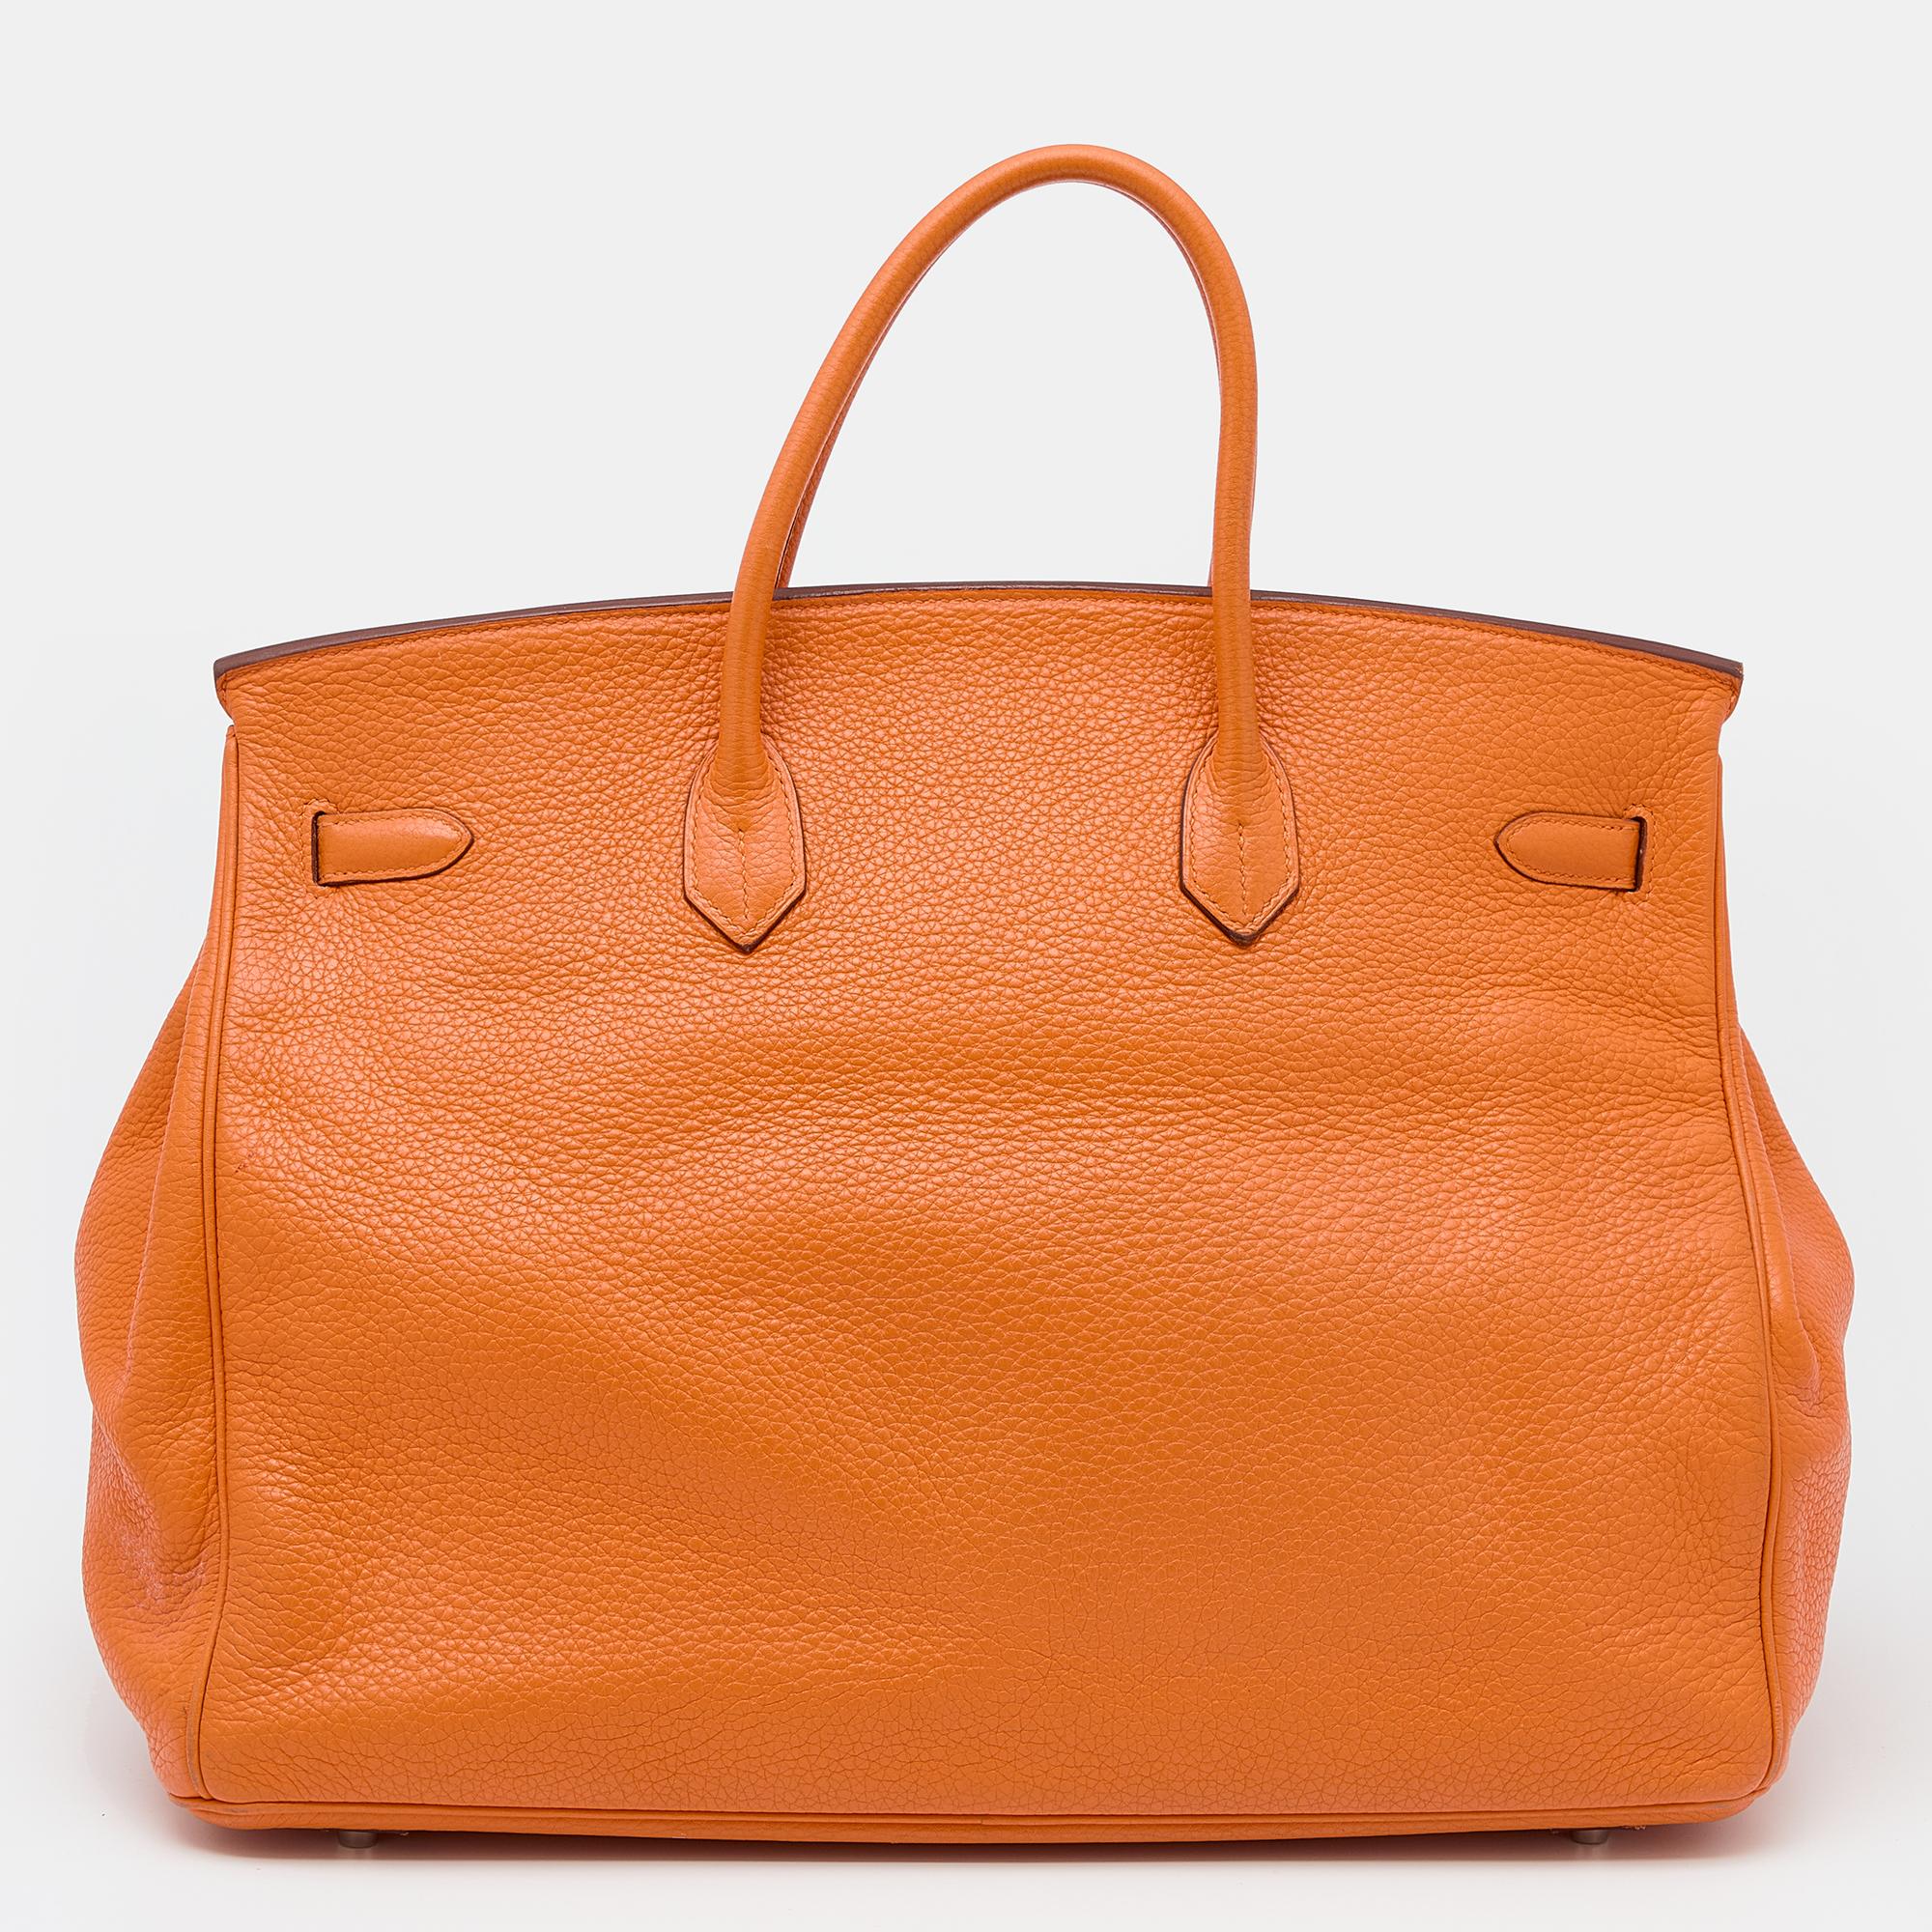 Hermès Birkin was inspired by Jane Birkin and is one of the most desired handbags in the world. A timeless classic that never goes out of style. Handcrafted from the highest quality of leather by skilled artisans, it takes long hours of rigorous